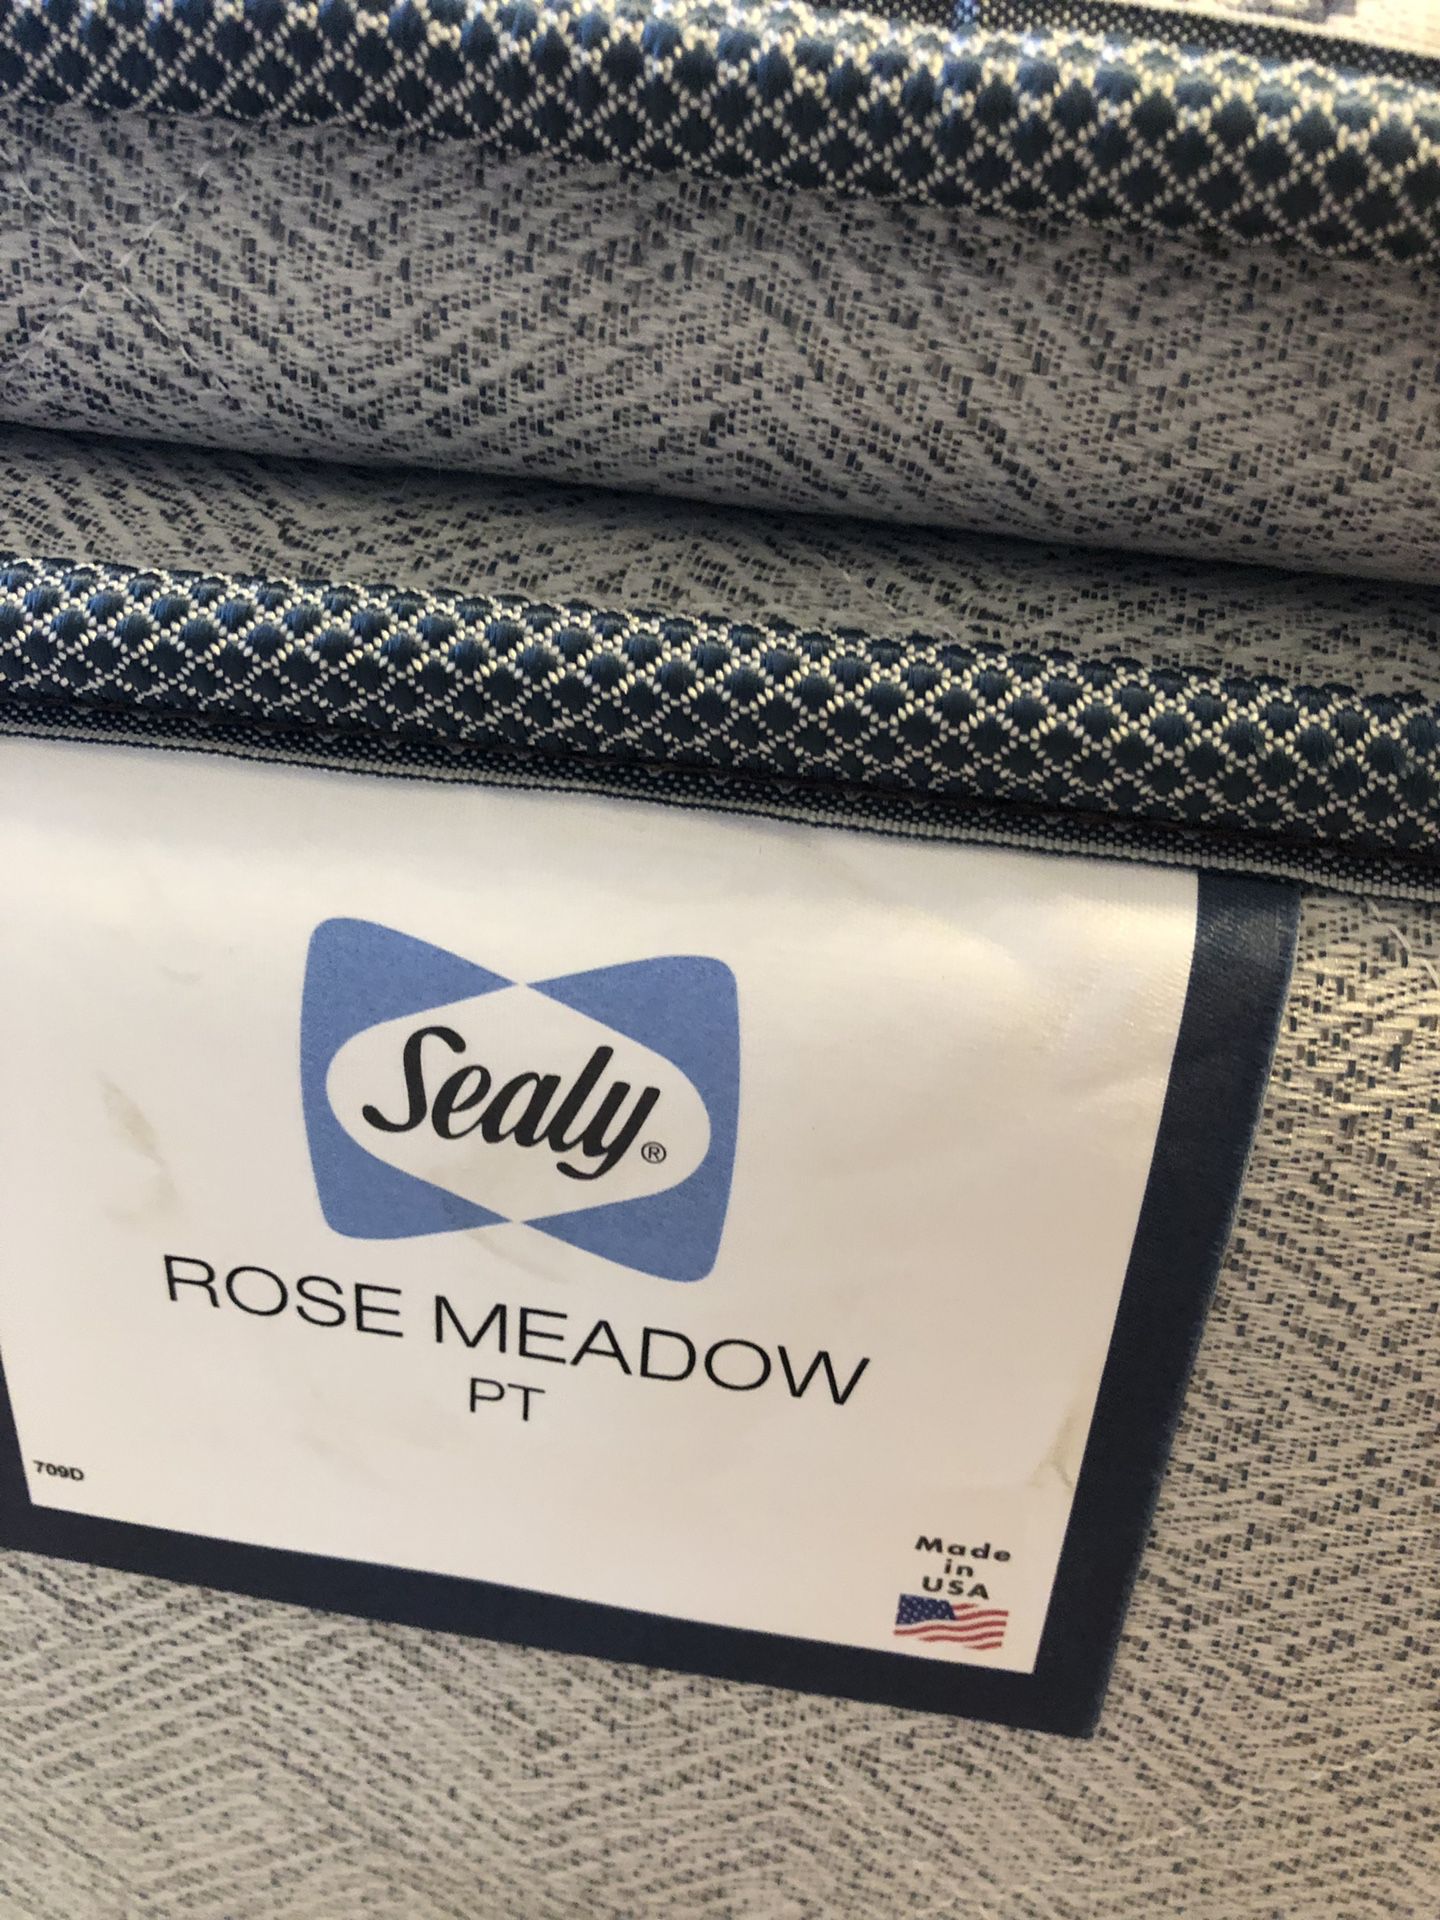 Sealy mattress, mattress pad, bed frame, and headboard for sale